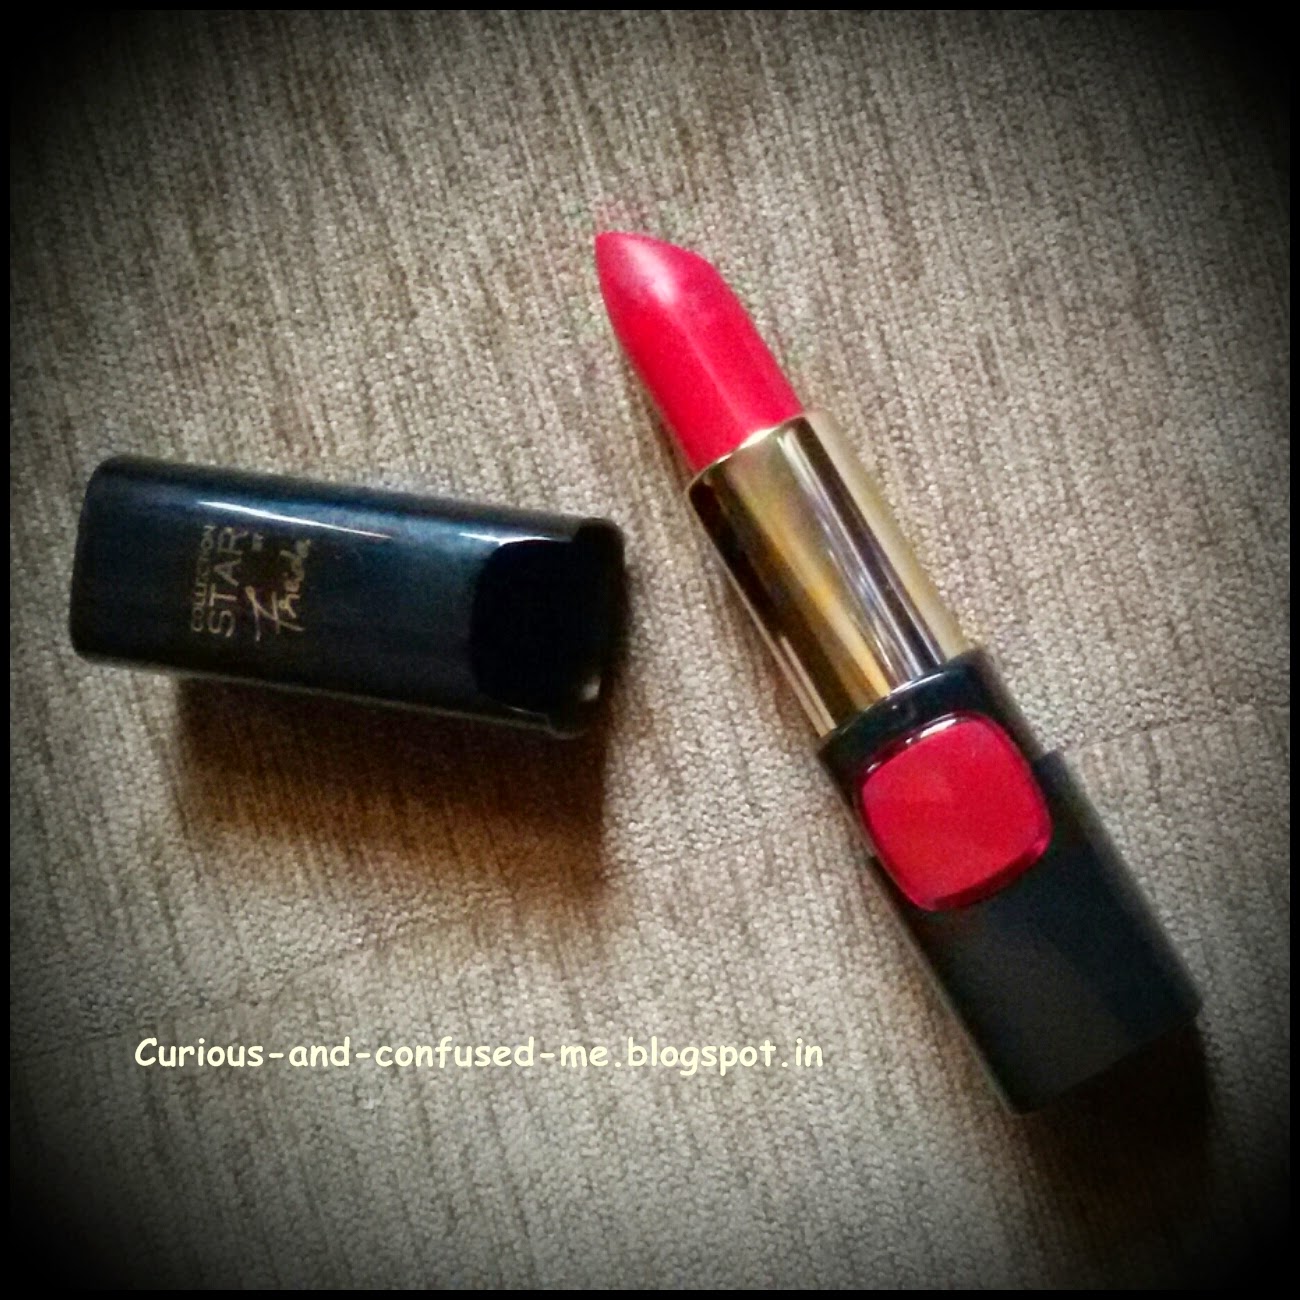 L'Oreal Pure Rouge review, L'Oreal Pure Rouge swatch, Loreal red coolection, Loreal Freida Pinto Red, Red lipstick for Dusky skin, Best Red lipstick India, Red lipstick under 1000, Loreal Red lipstick , Best Loreal lipstick